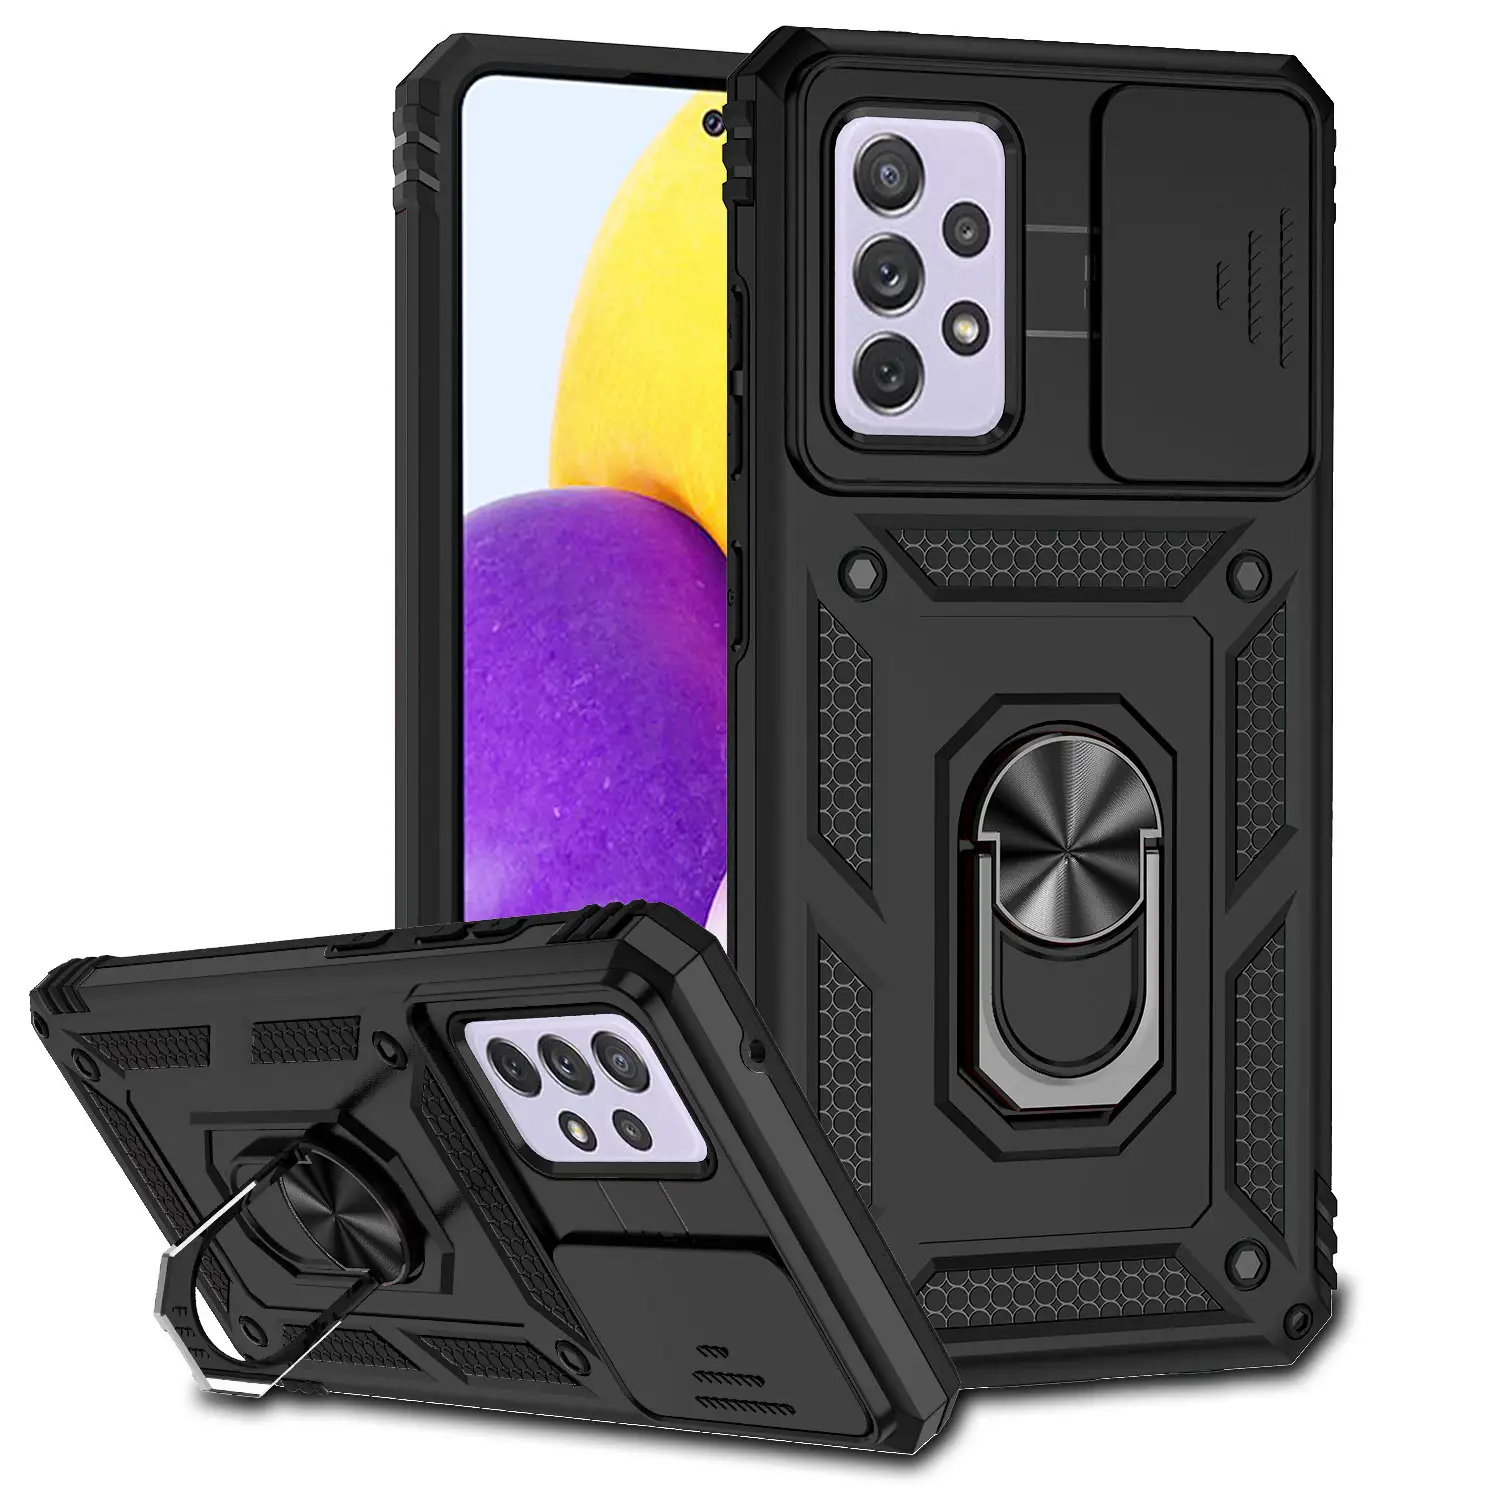 Hybrid heavy duty rugged case with kickstand and camera cover lens protection sliding window for Samsung A72 redmi 9A 9C note 10